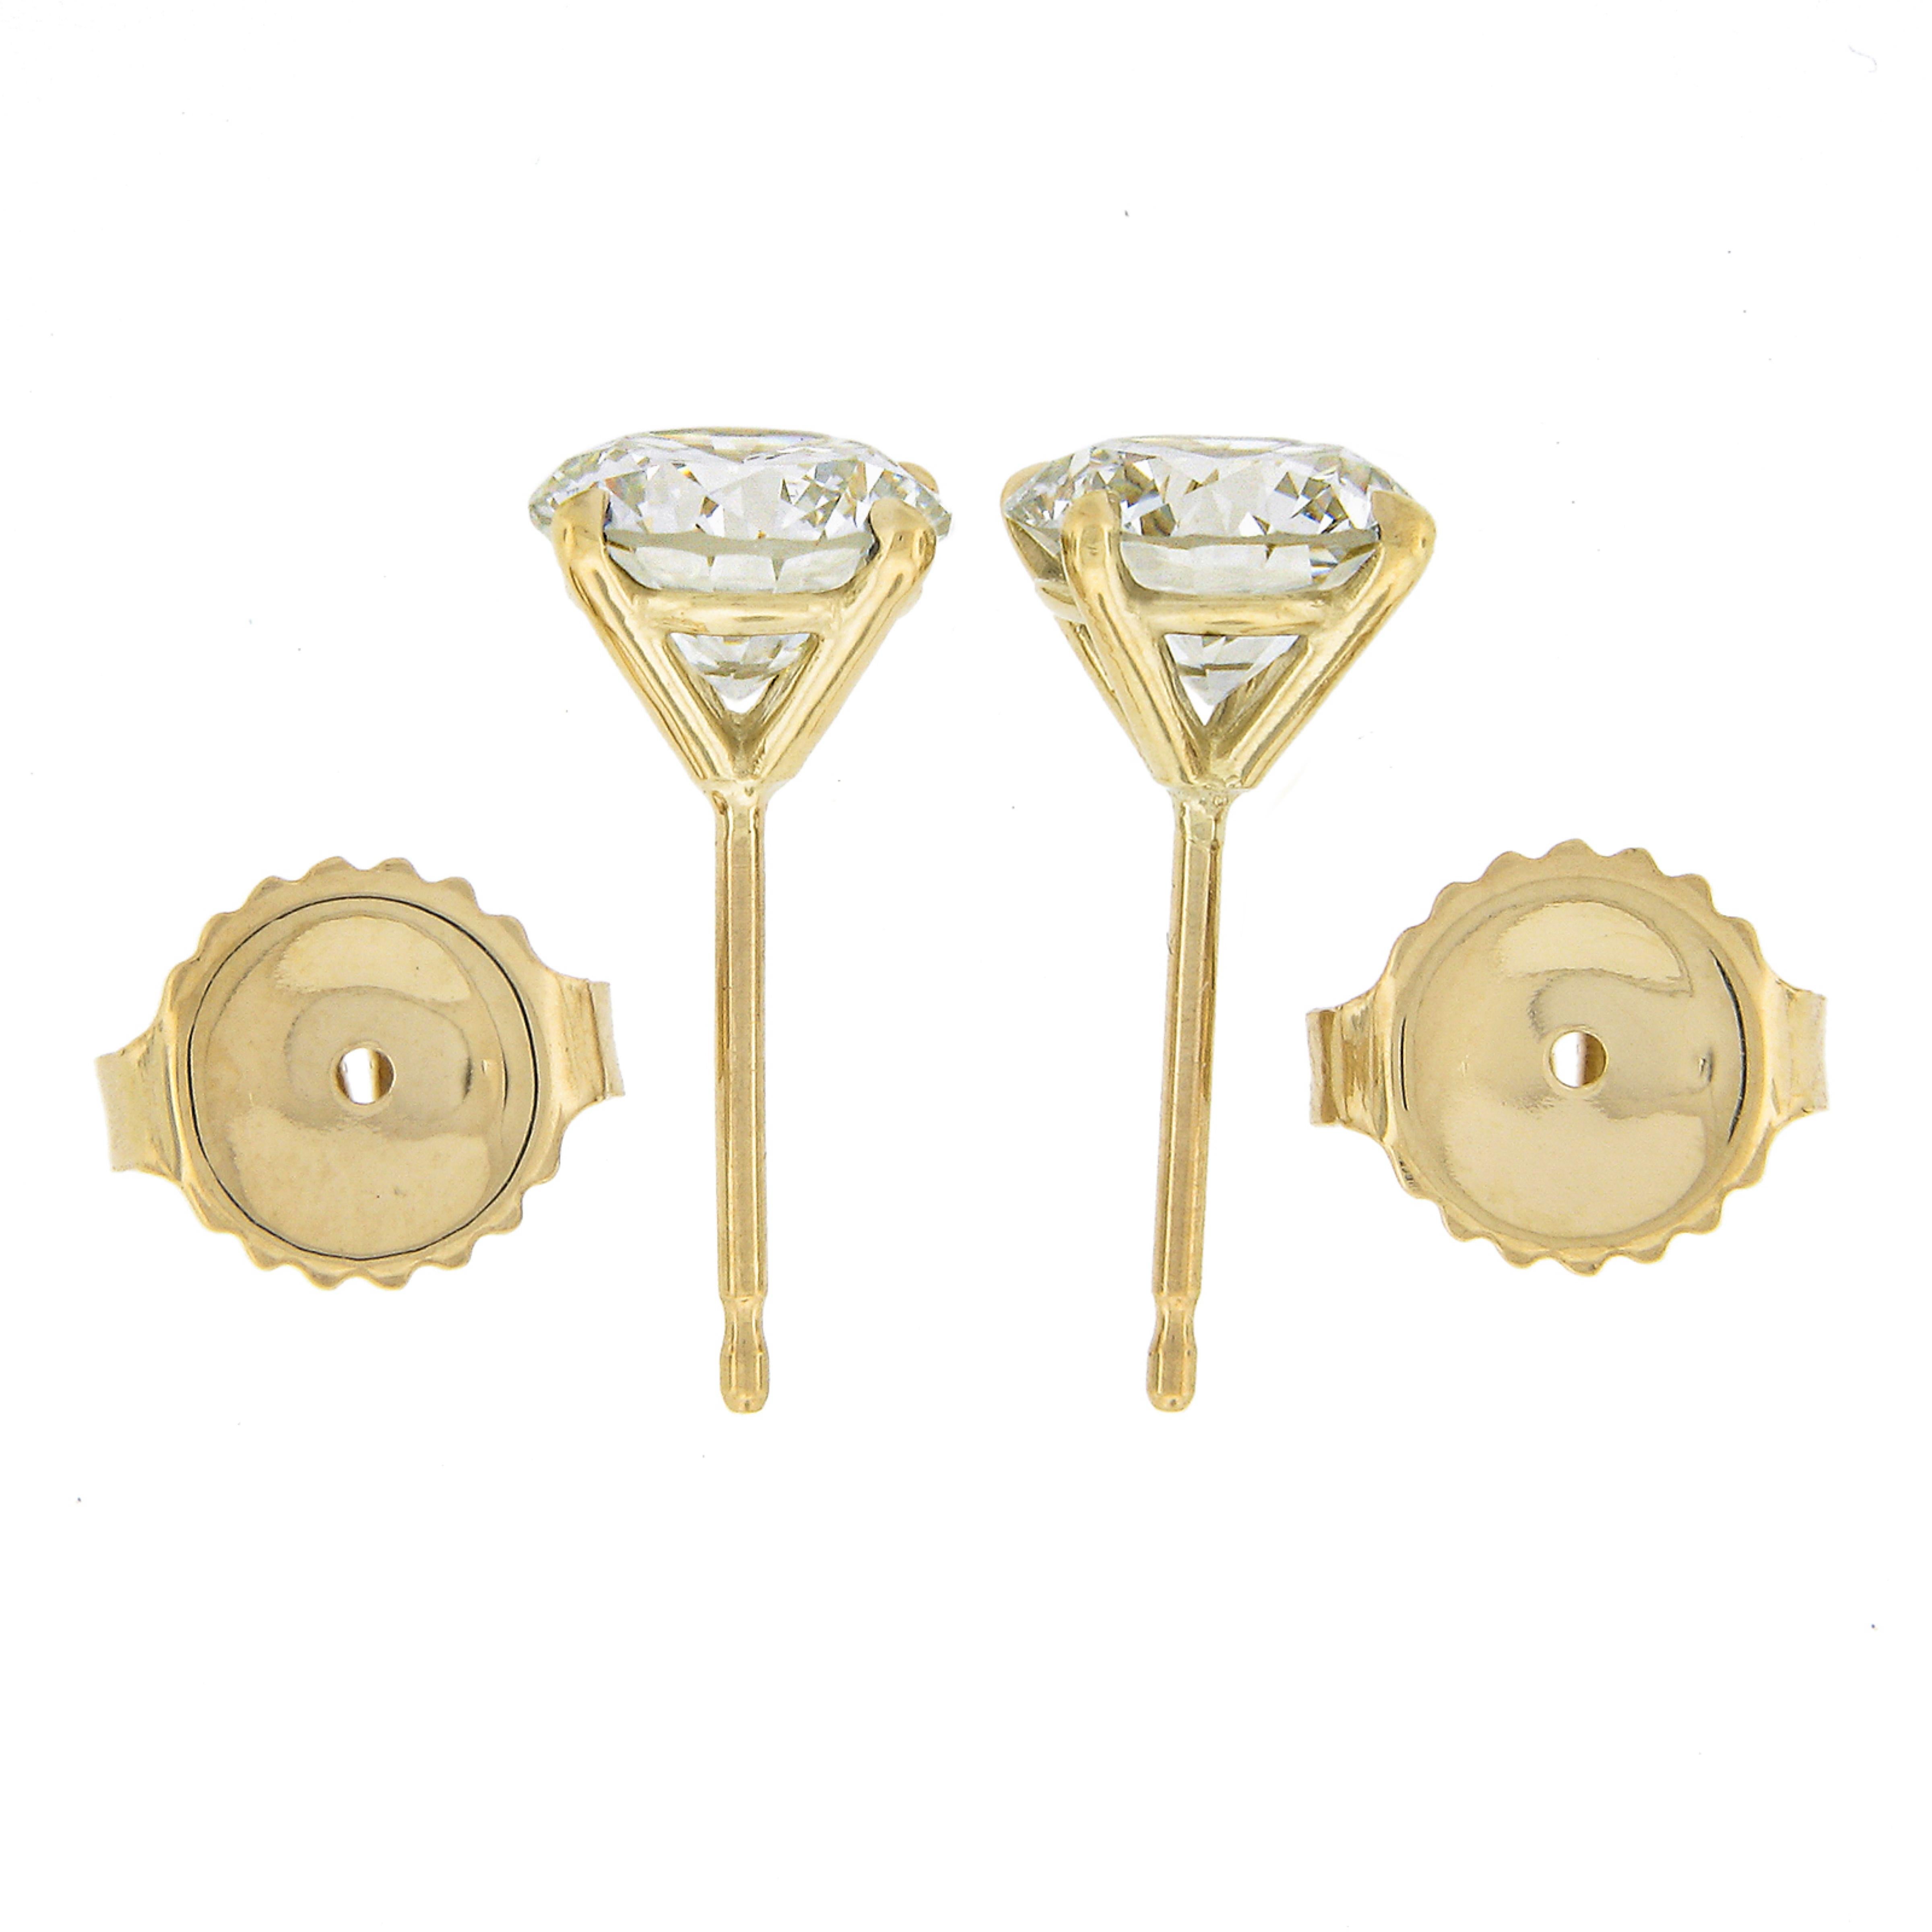 New 18K Gold 1.81Carat Gia Round Brilliant Diamond 4 Prong Martini Stud Earrings In New Condition For Sale In Montclair, NJ